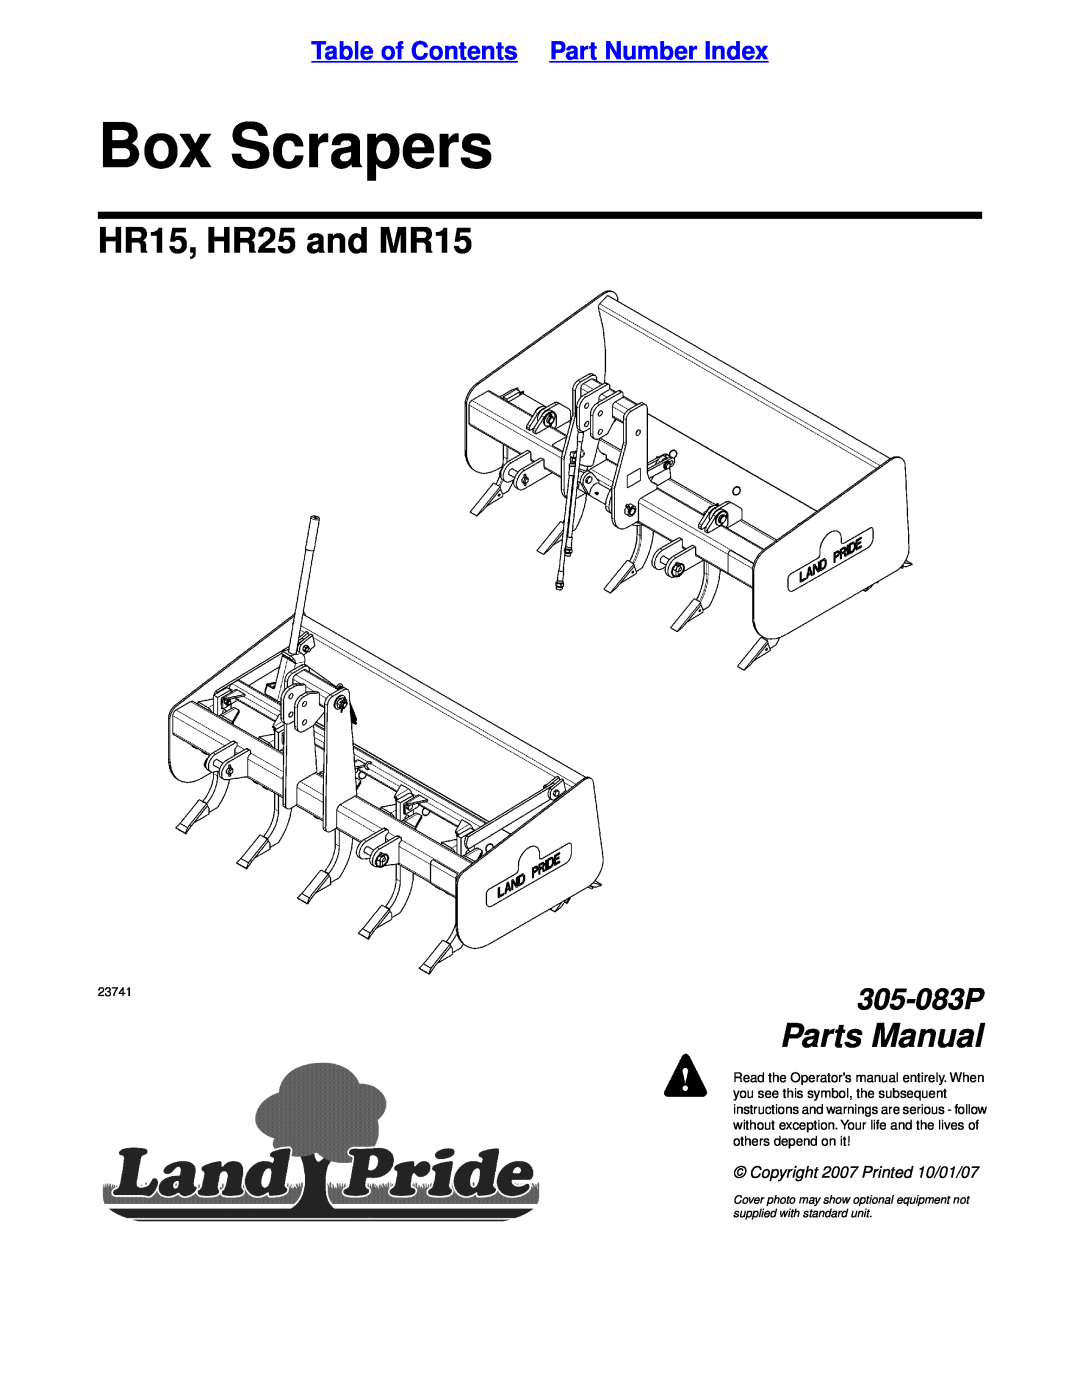 Land Pride specifications Specifications & Capacities Box Scrapers, HR15 & MR15 Series Retractable, 1548, 1554, 1560 